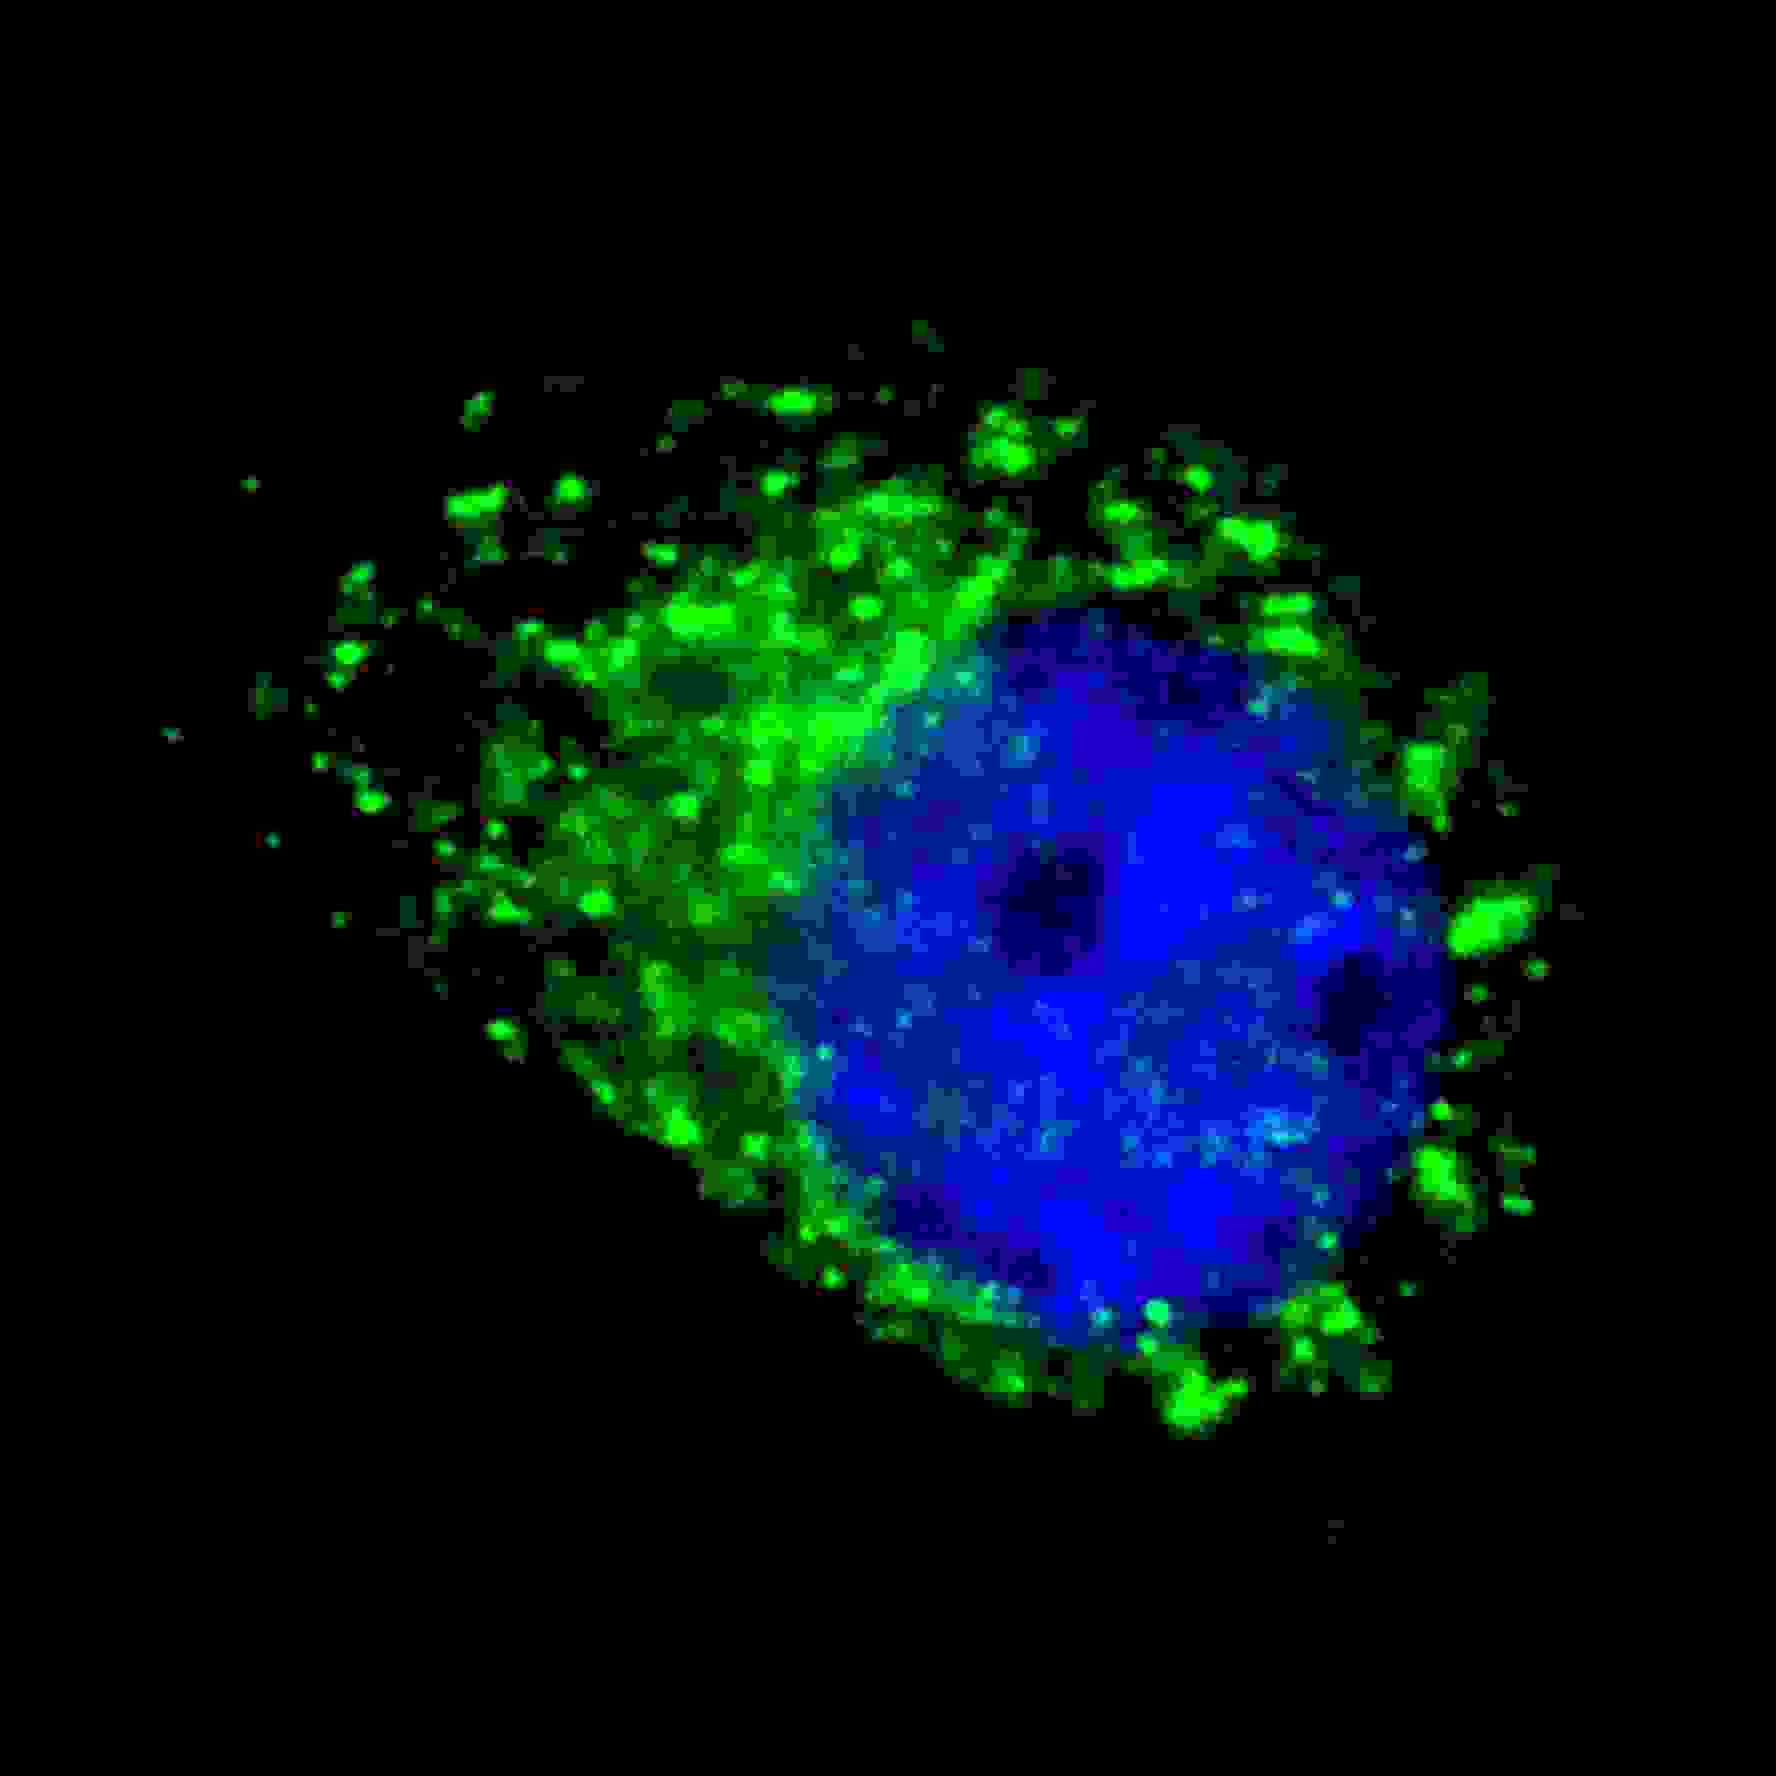 Fluorescent image of U251 cells stained with APG8a/b (MAP1LC3A/B) antibody. U251 cells were treated with Chloroquine (50 ?M,16h), then fixed with 4% PFA (20 min), permeabilized with Triton X-100 (0.2%, 30 min). Cells were then incubated with AP10648a APG8a/b (MAP1LC3A/B) primary antibody (1:100, 2 h at room temperature). For secondary antibody, Alexa Fluor� 488 conjugated donkey anti-rabbit antibody (green) was used (1:1000, 1h). Nuclei were counterstained with Hoechst 33342 (blue) (10 ?g/ml, 5 min). APG8a/b (MAP1LC3A/B) immunoreactivity is localized to autophagic vacuoles in the cytoplasm of U251 cells. 